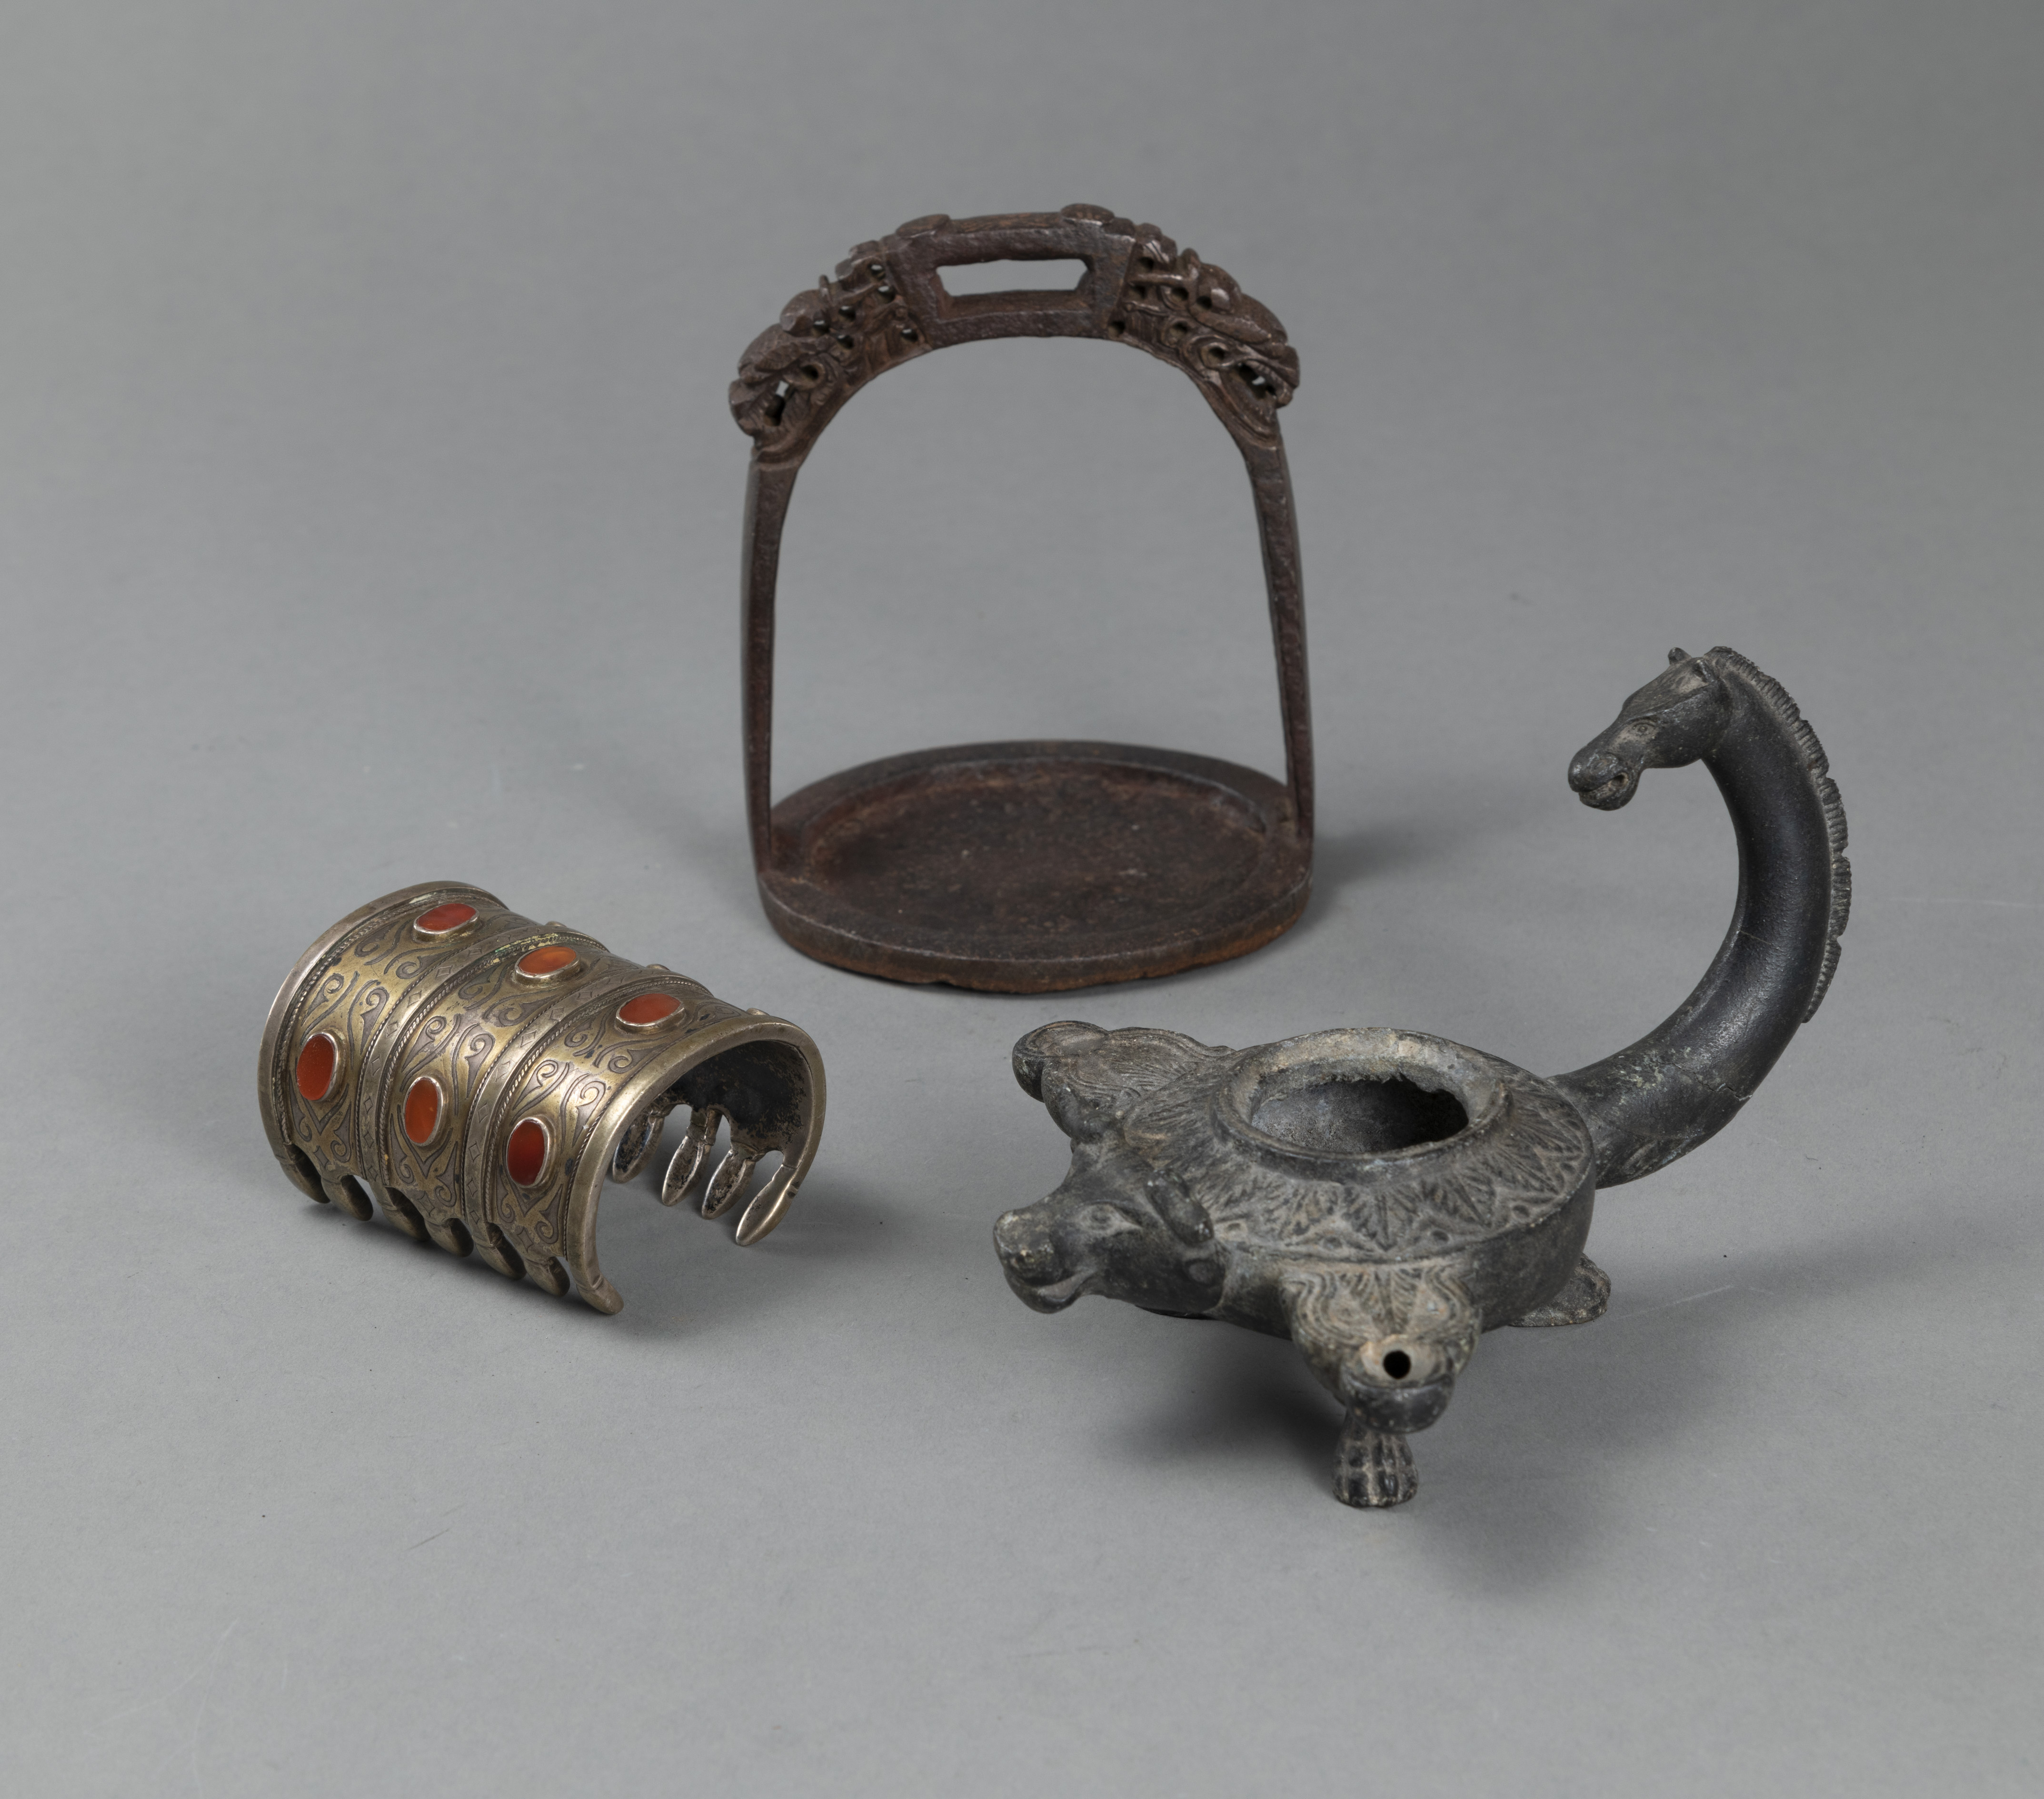 AN IRON STIRRUP, A BRACELET WITH CARNELIAN STONES AND A BRONZE OIL LAMP